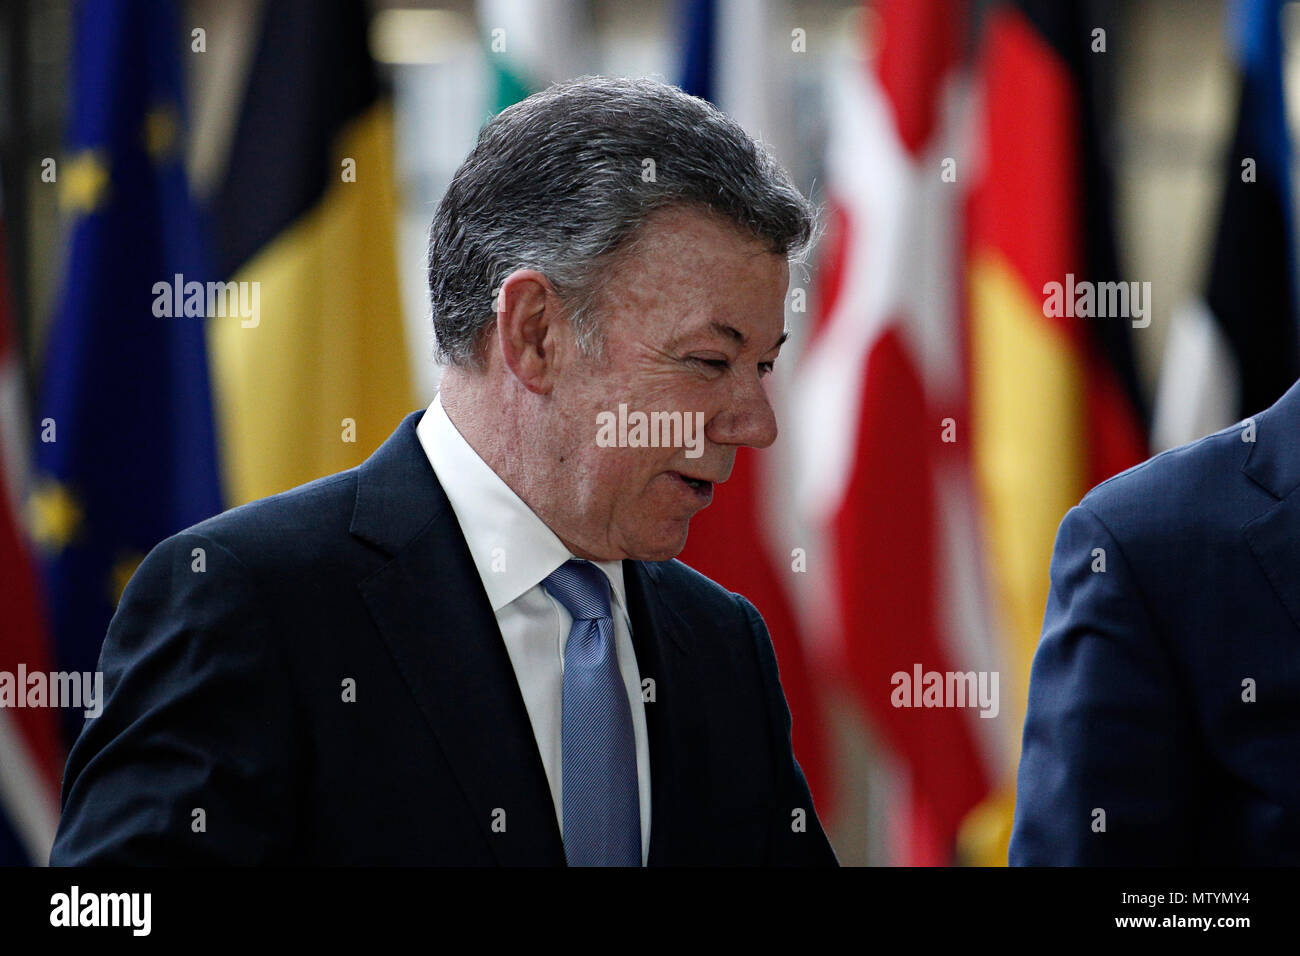 Brussels, Belgium. 31st May 2018. Donald Tusk, the President of the European Council  welcomes the President of the Republic of Colombia Juan Manuel Santos at European Council headquarters. Alexandros Michailidis /Alamy Live News Stock Photo